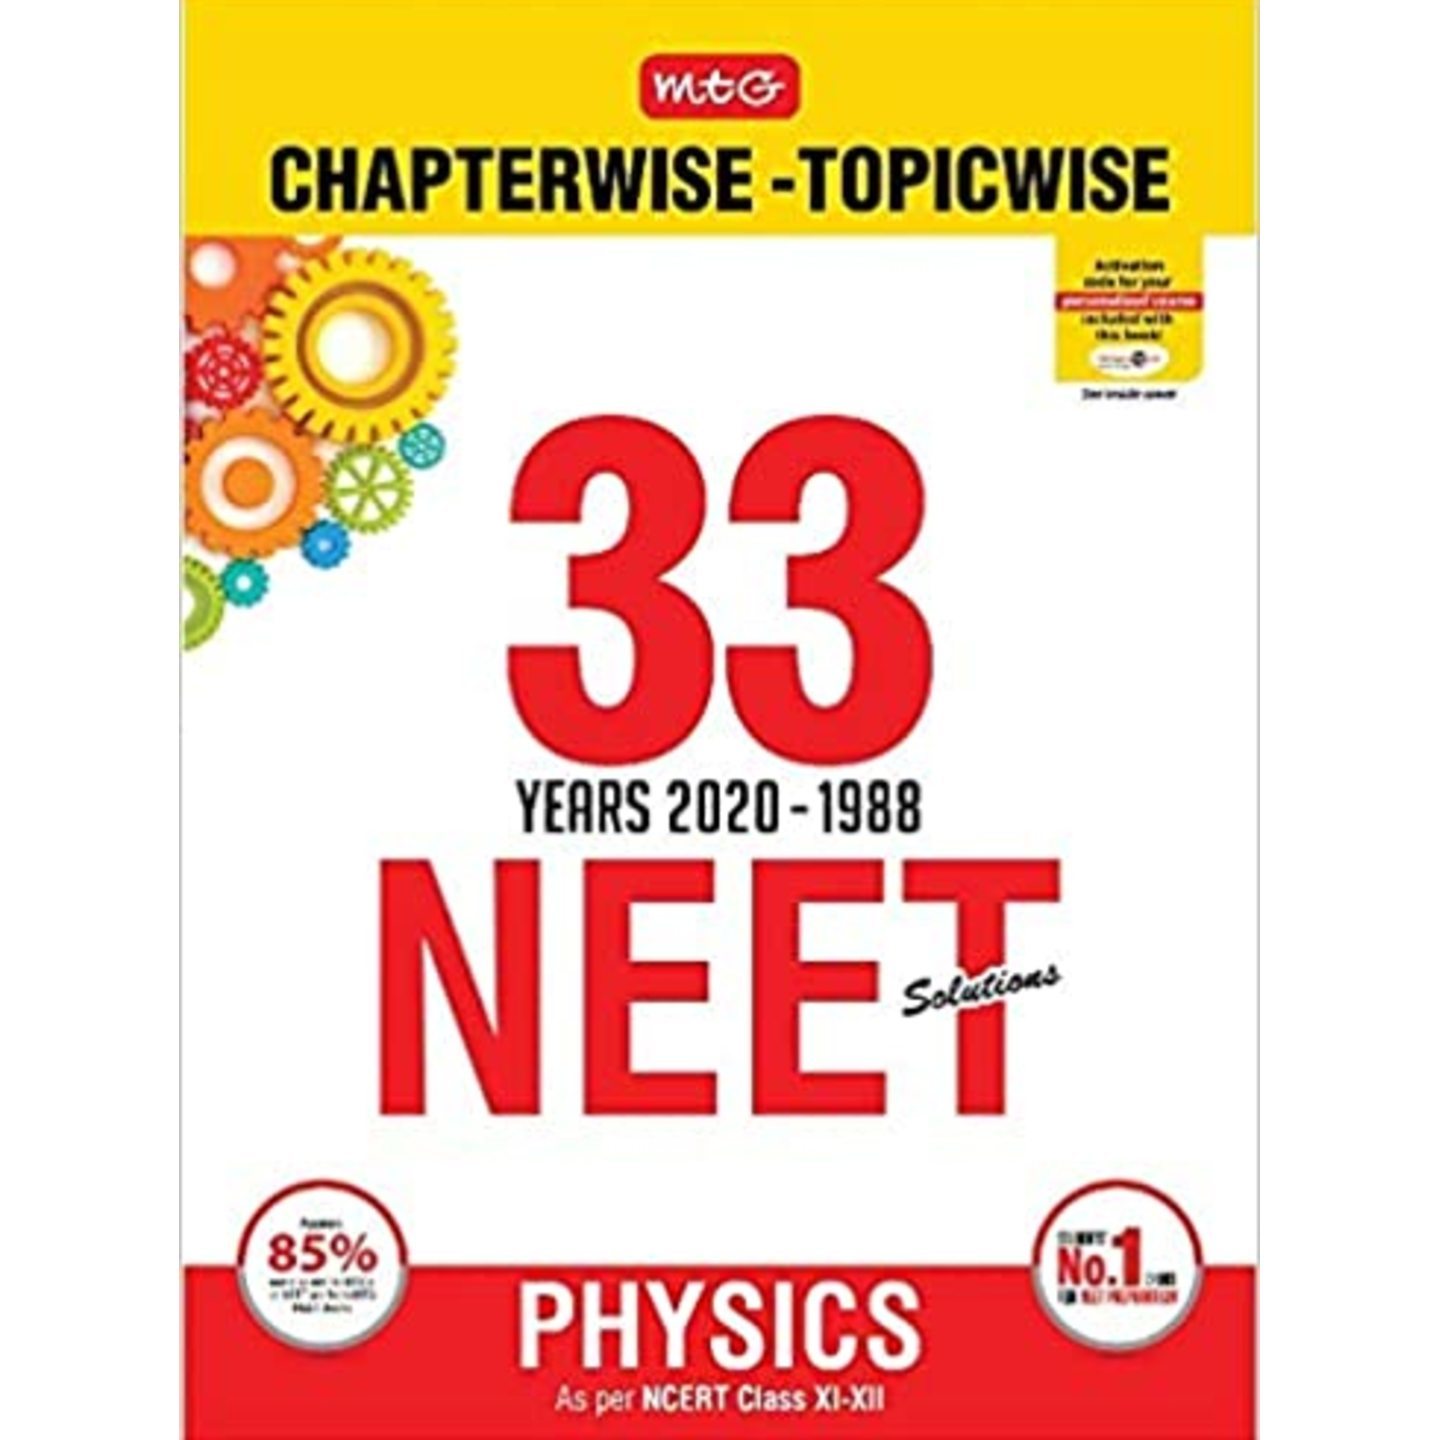 33 Years NEET-AIPMT Chapterwise Solutions - Physics